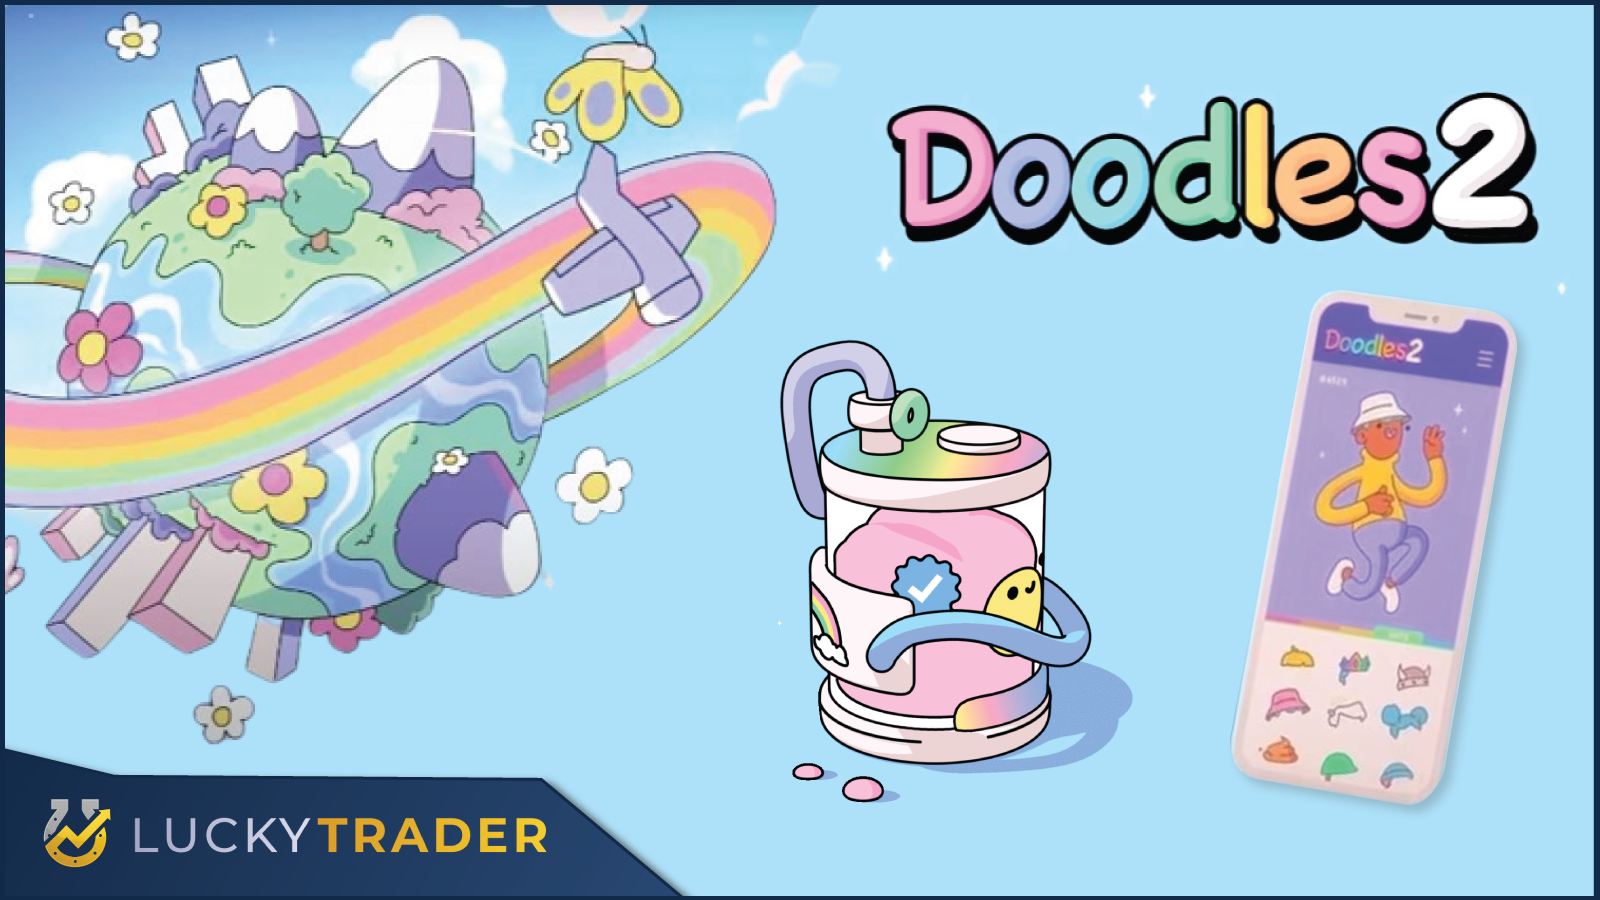 What Is Doodles 2? Here's Everything You Need to Know